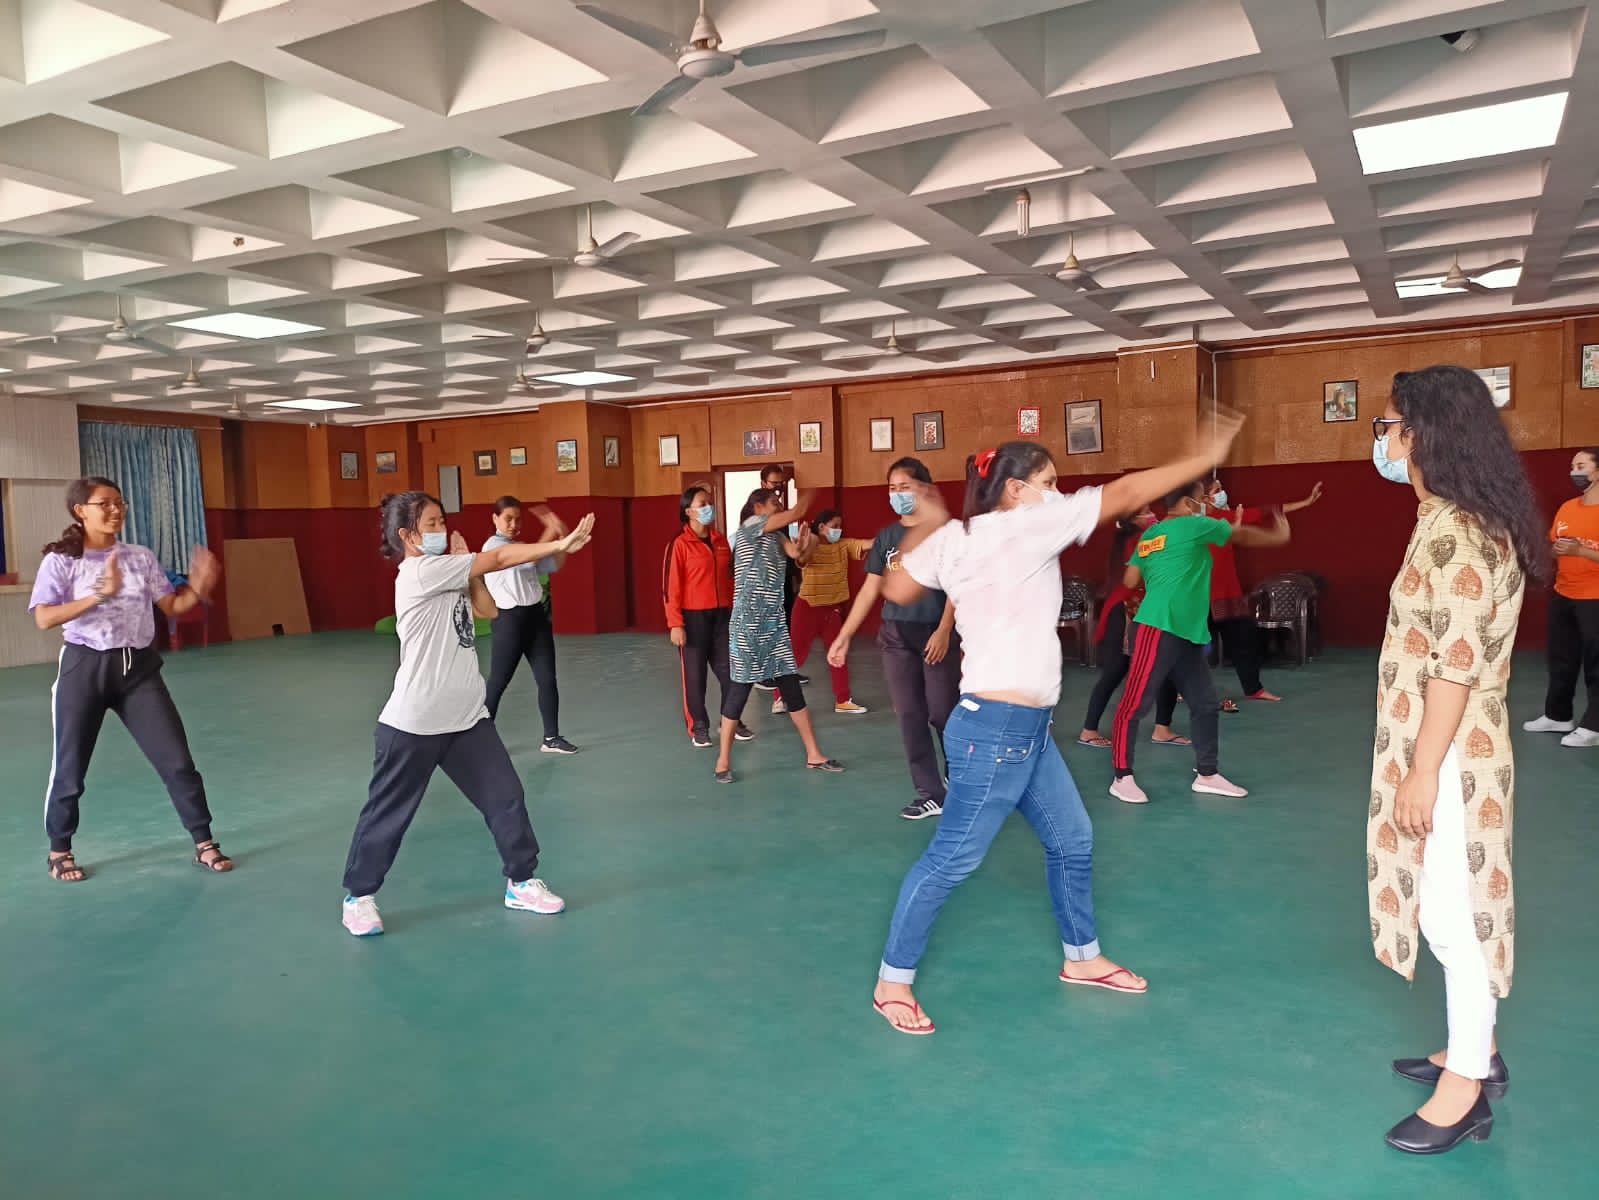 Several women practicing self-defense in a big hall.